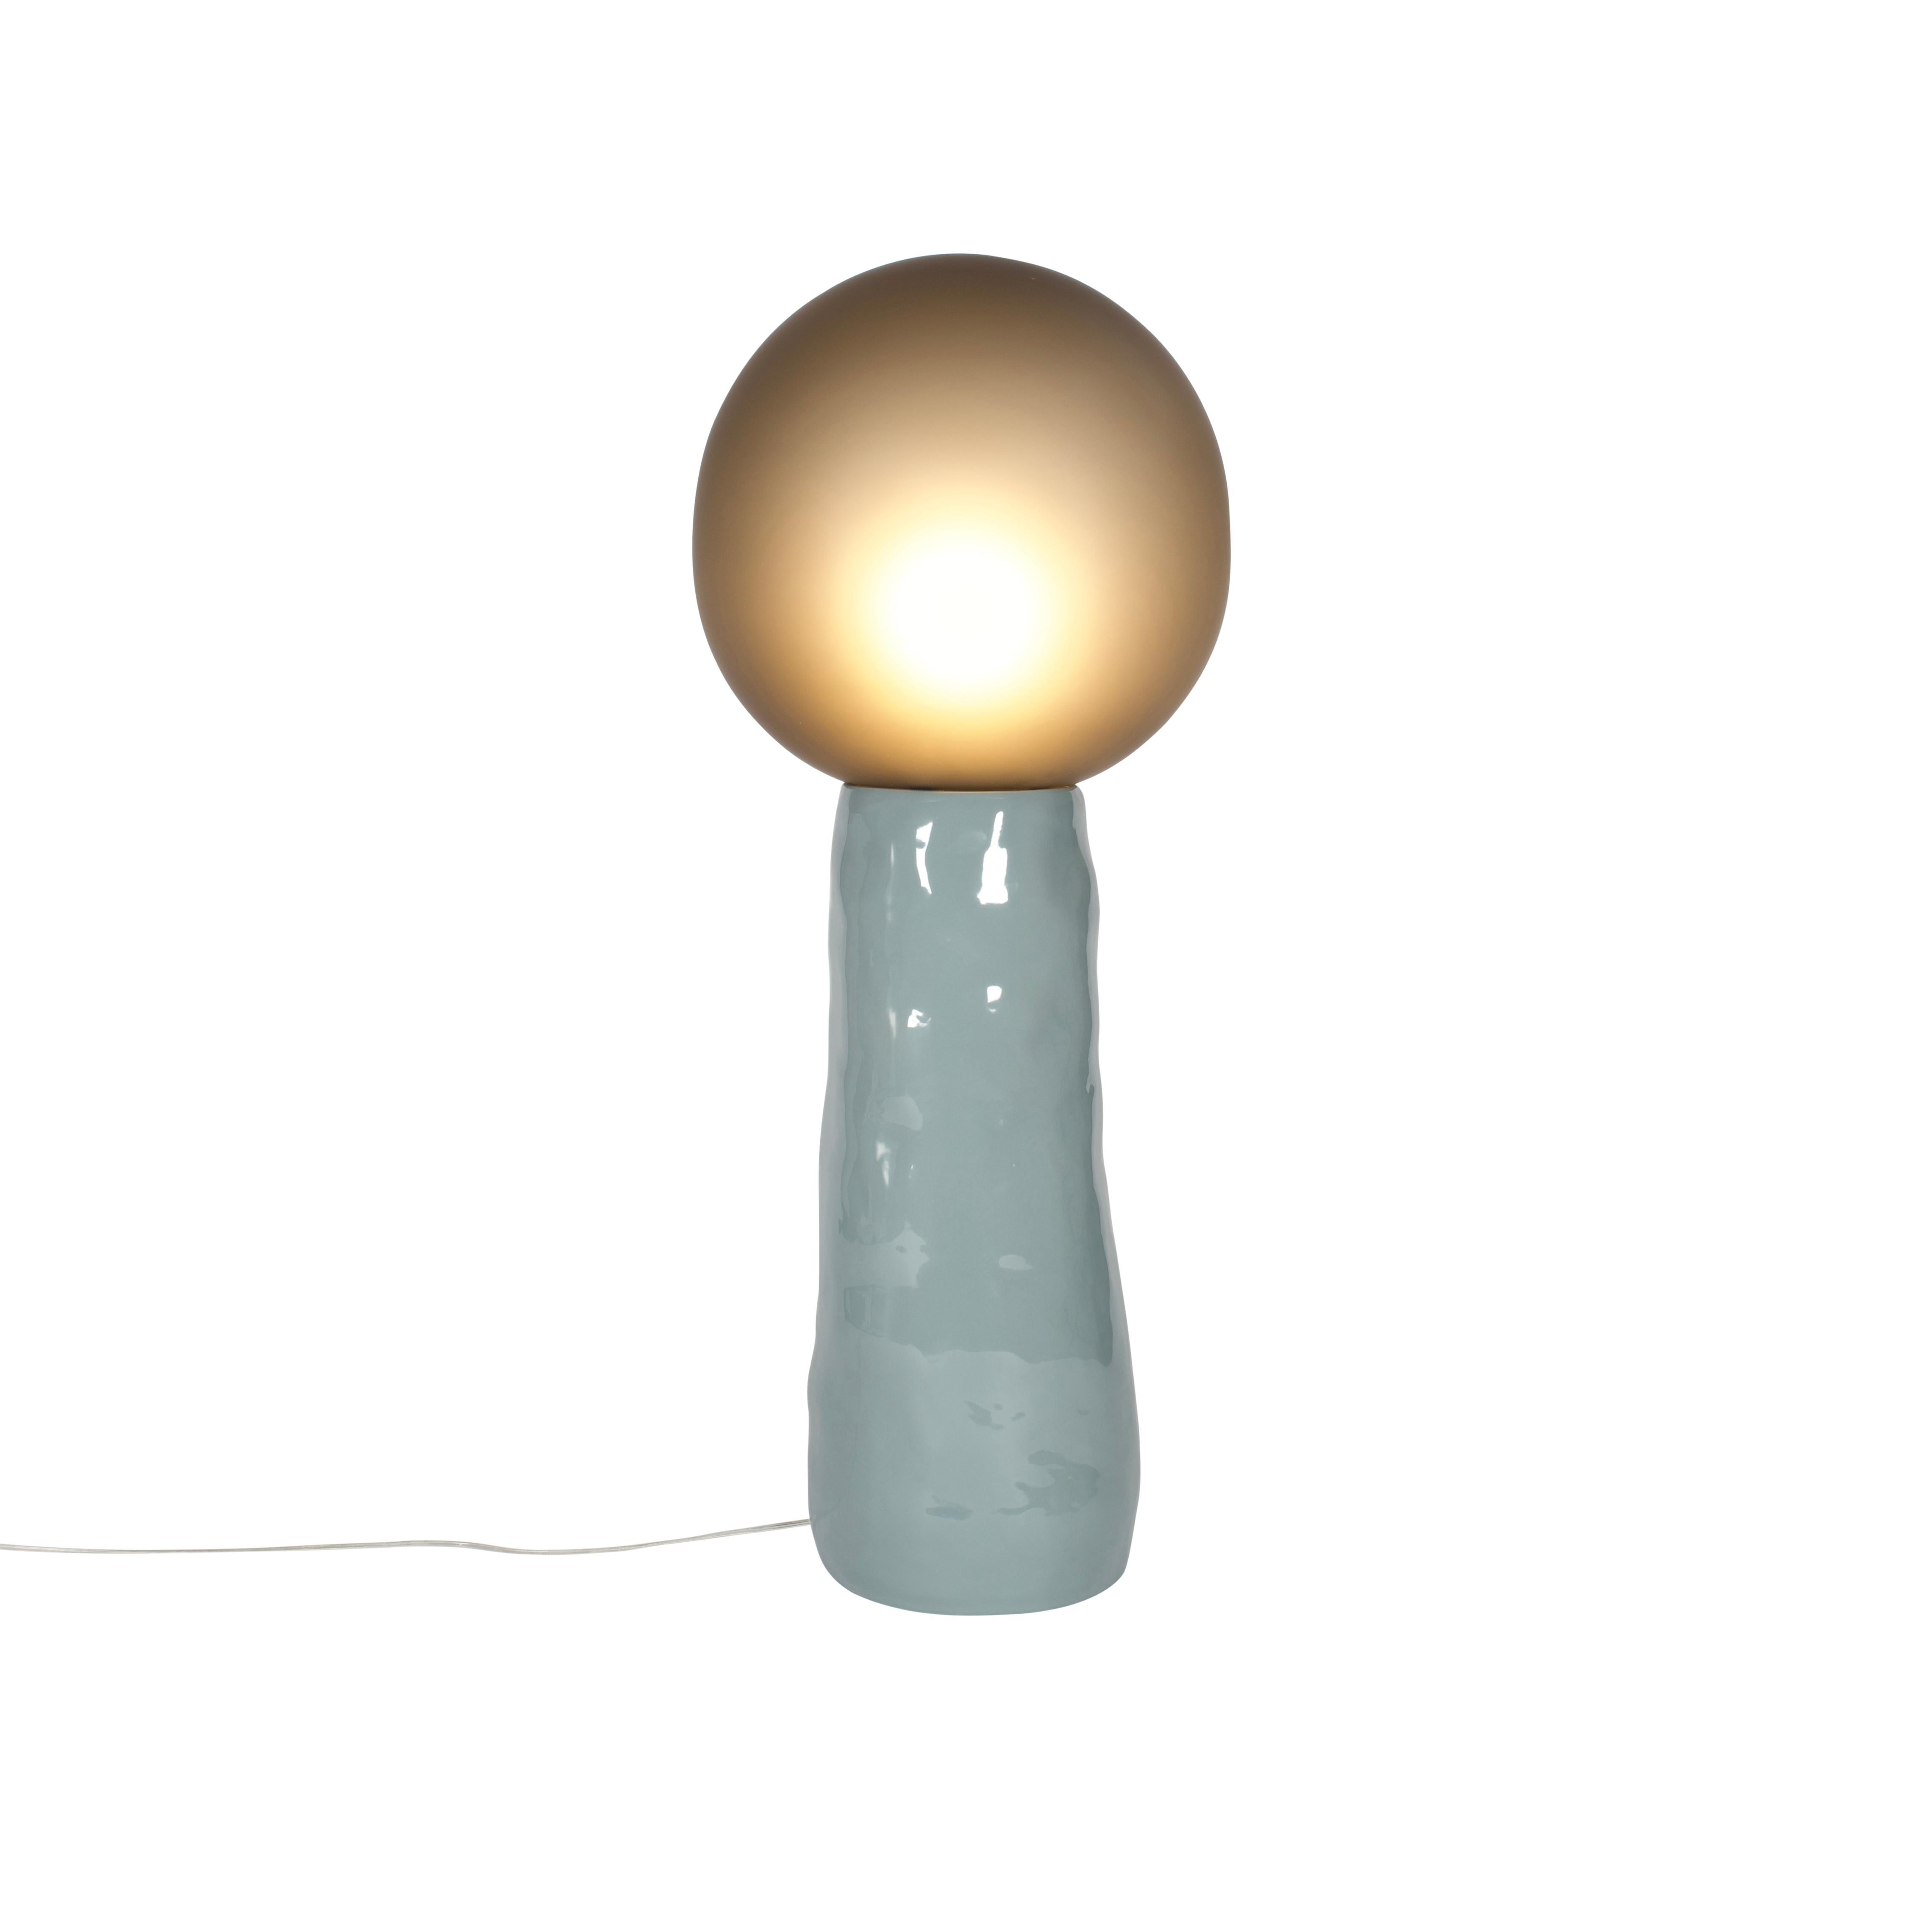 Kokeshi high grey acetato grey floor lamp by Pulpo.
Dimensions: D60 x H150 cm.
Materials: glass and ceramic.

Also available in different finishes: white acetato white, grey acetato white, white acetato grey, grey acetato grey, white acetato